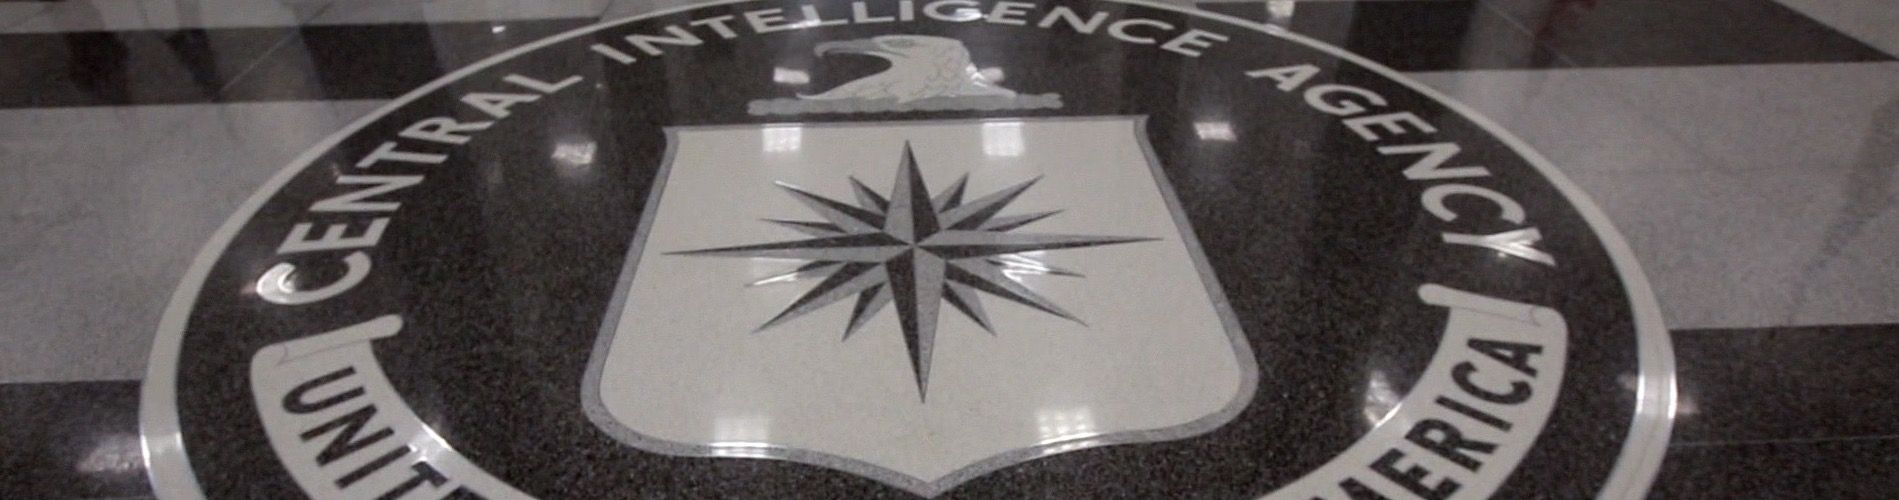 The CIA (Finally) Joins Twitter